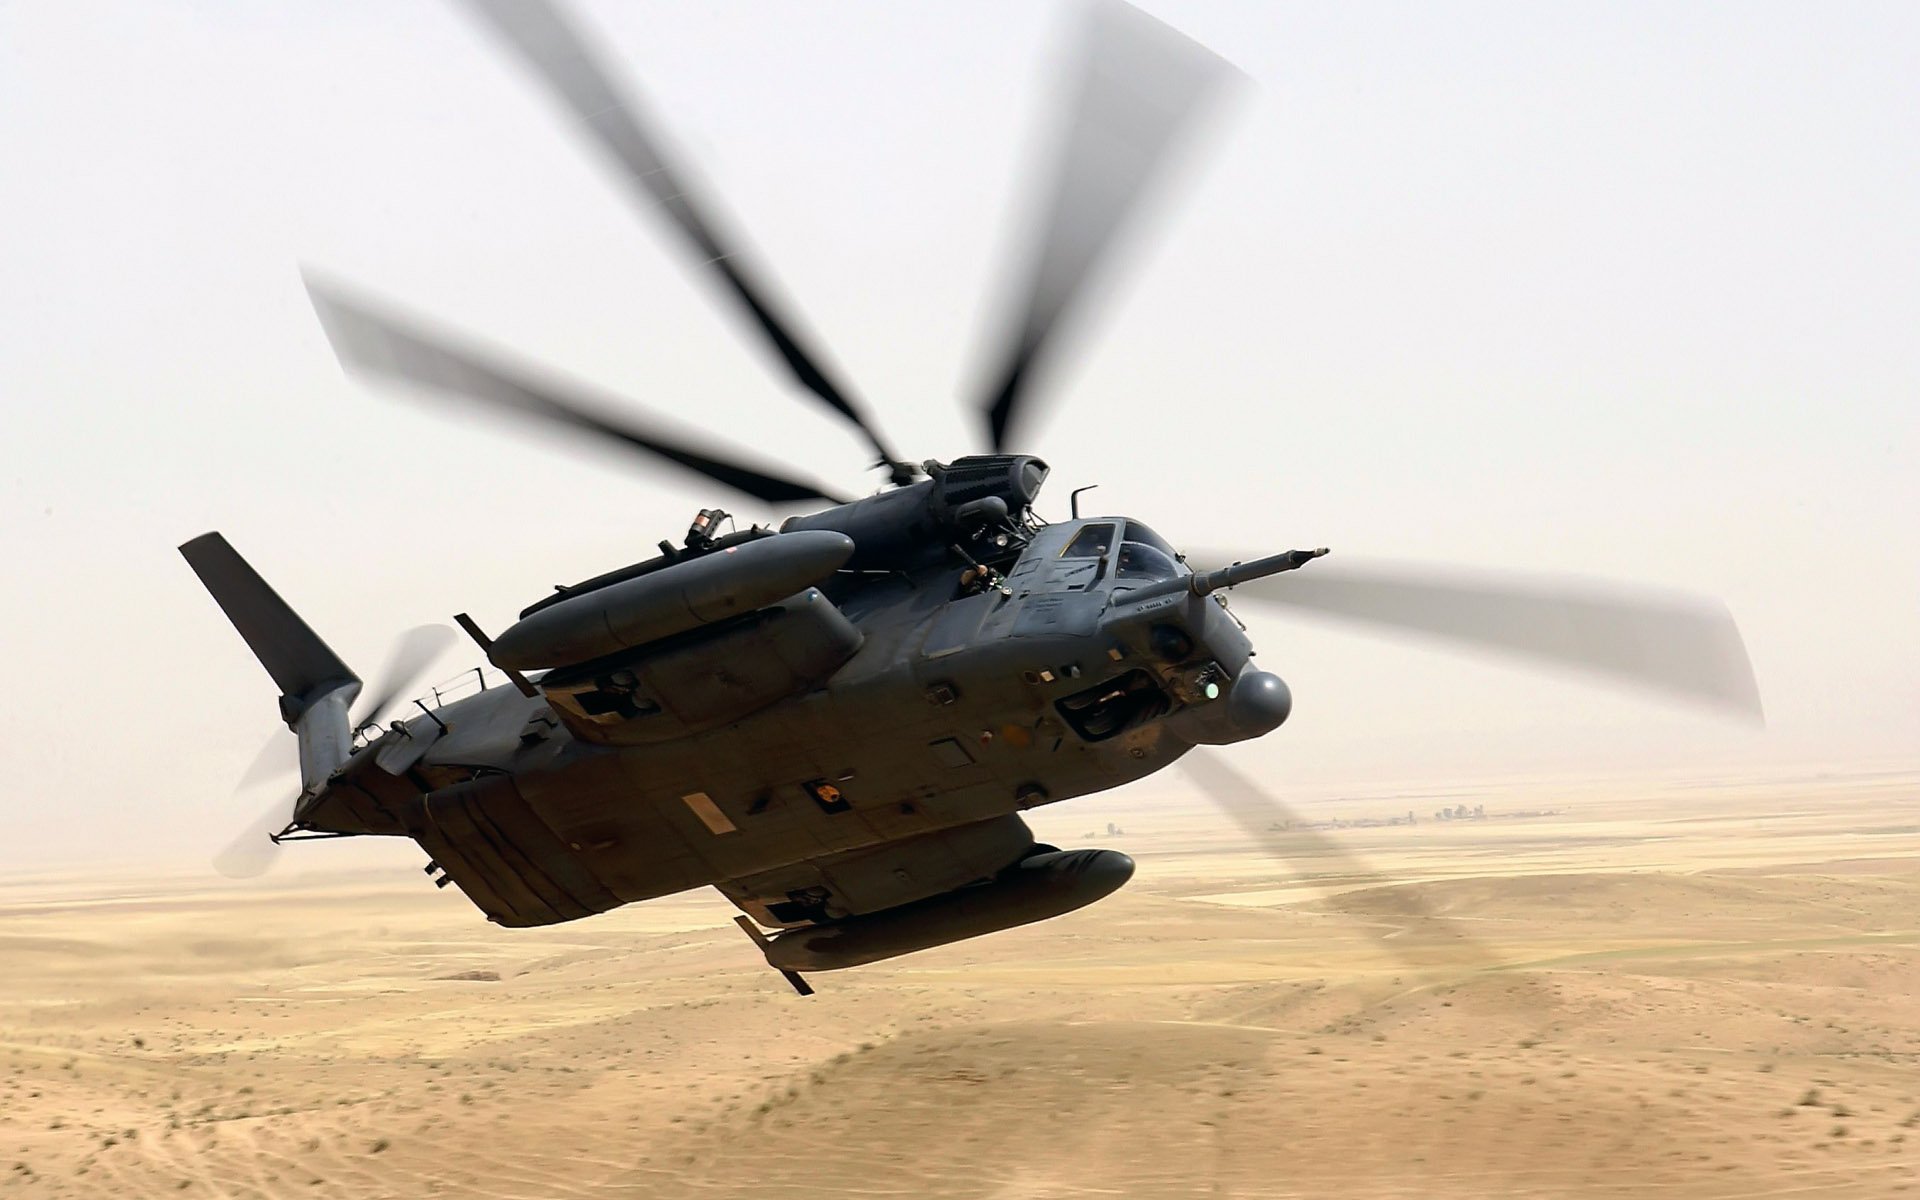 aircraft, Helicopters, Deserts, Pave, Low, Vehicles, Mh 53, Pave, Low Wallpaper